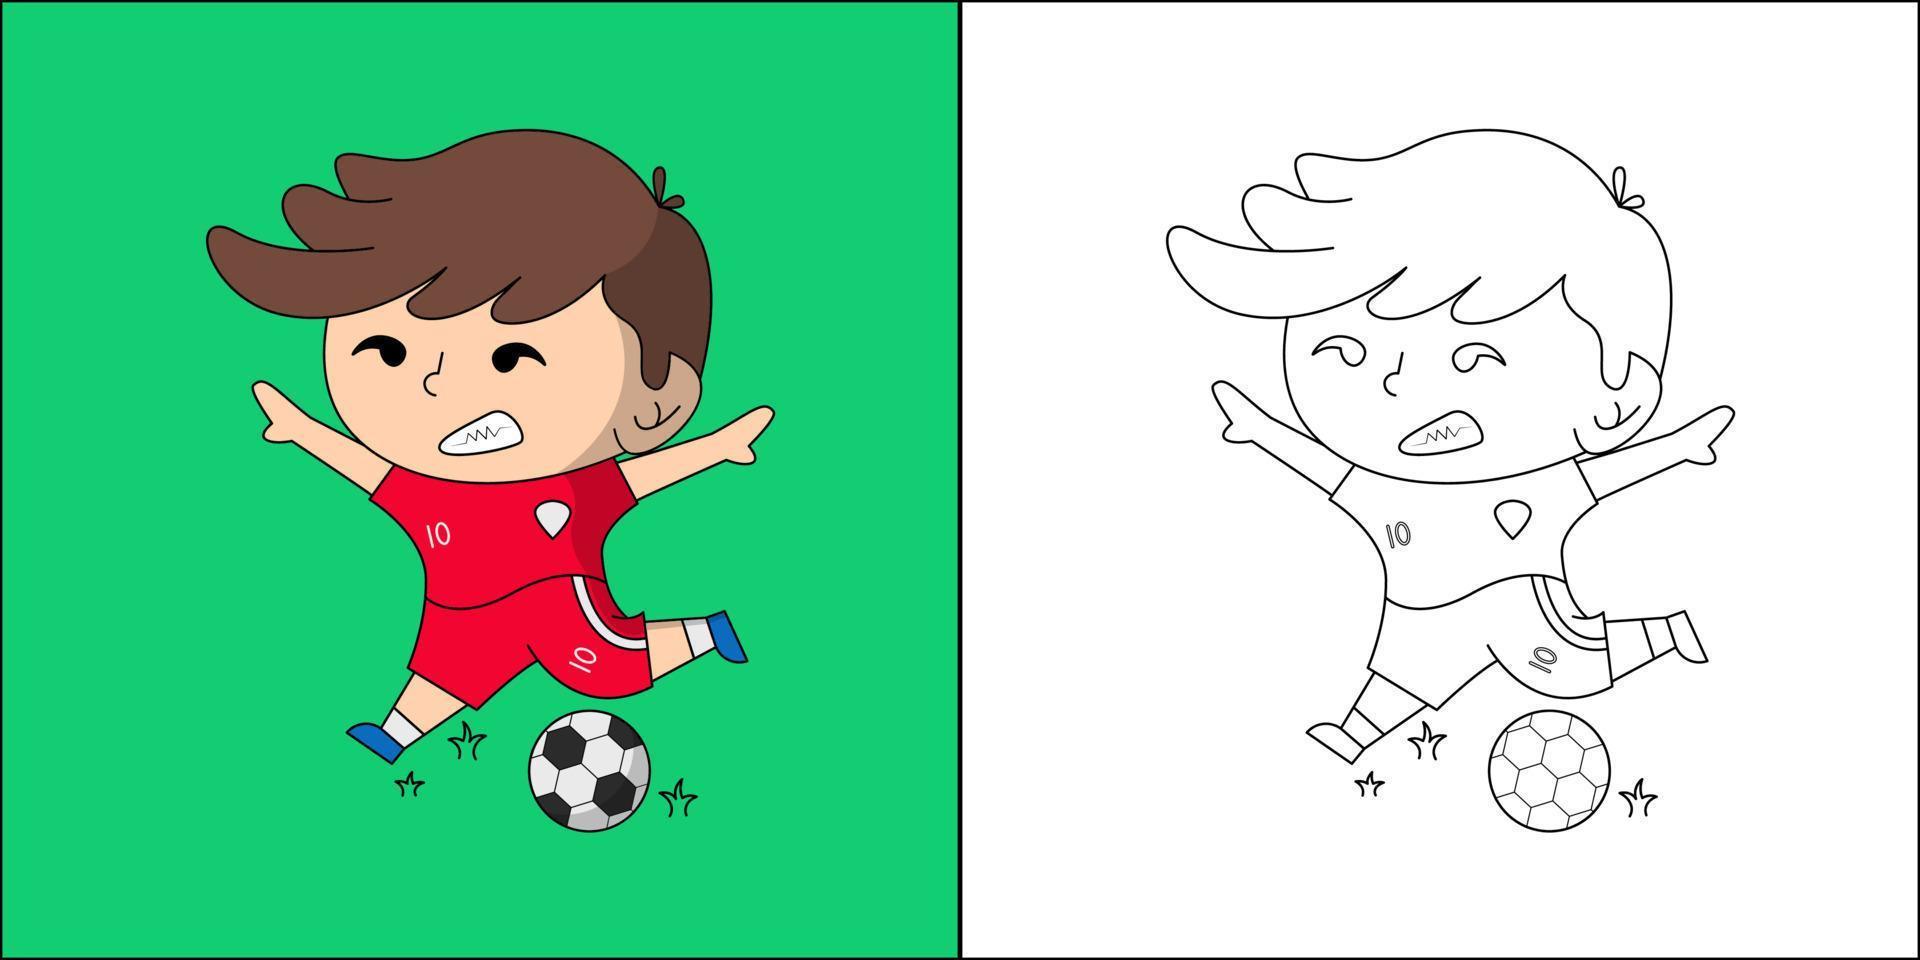 Cute boy playing ball suitable for children's coloring page vector illustration